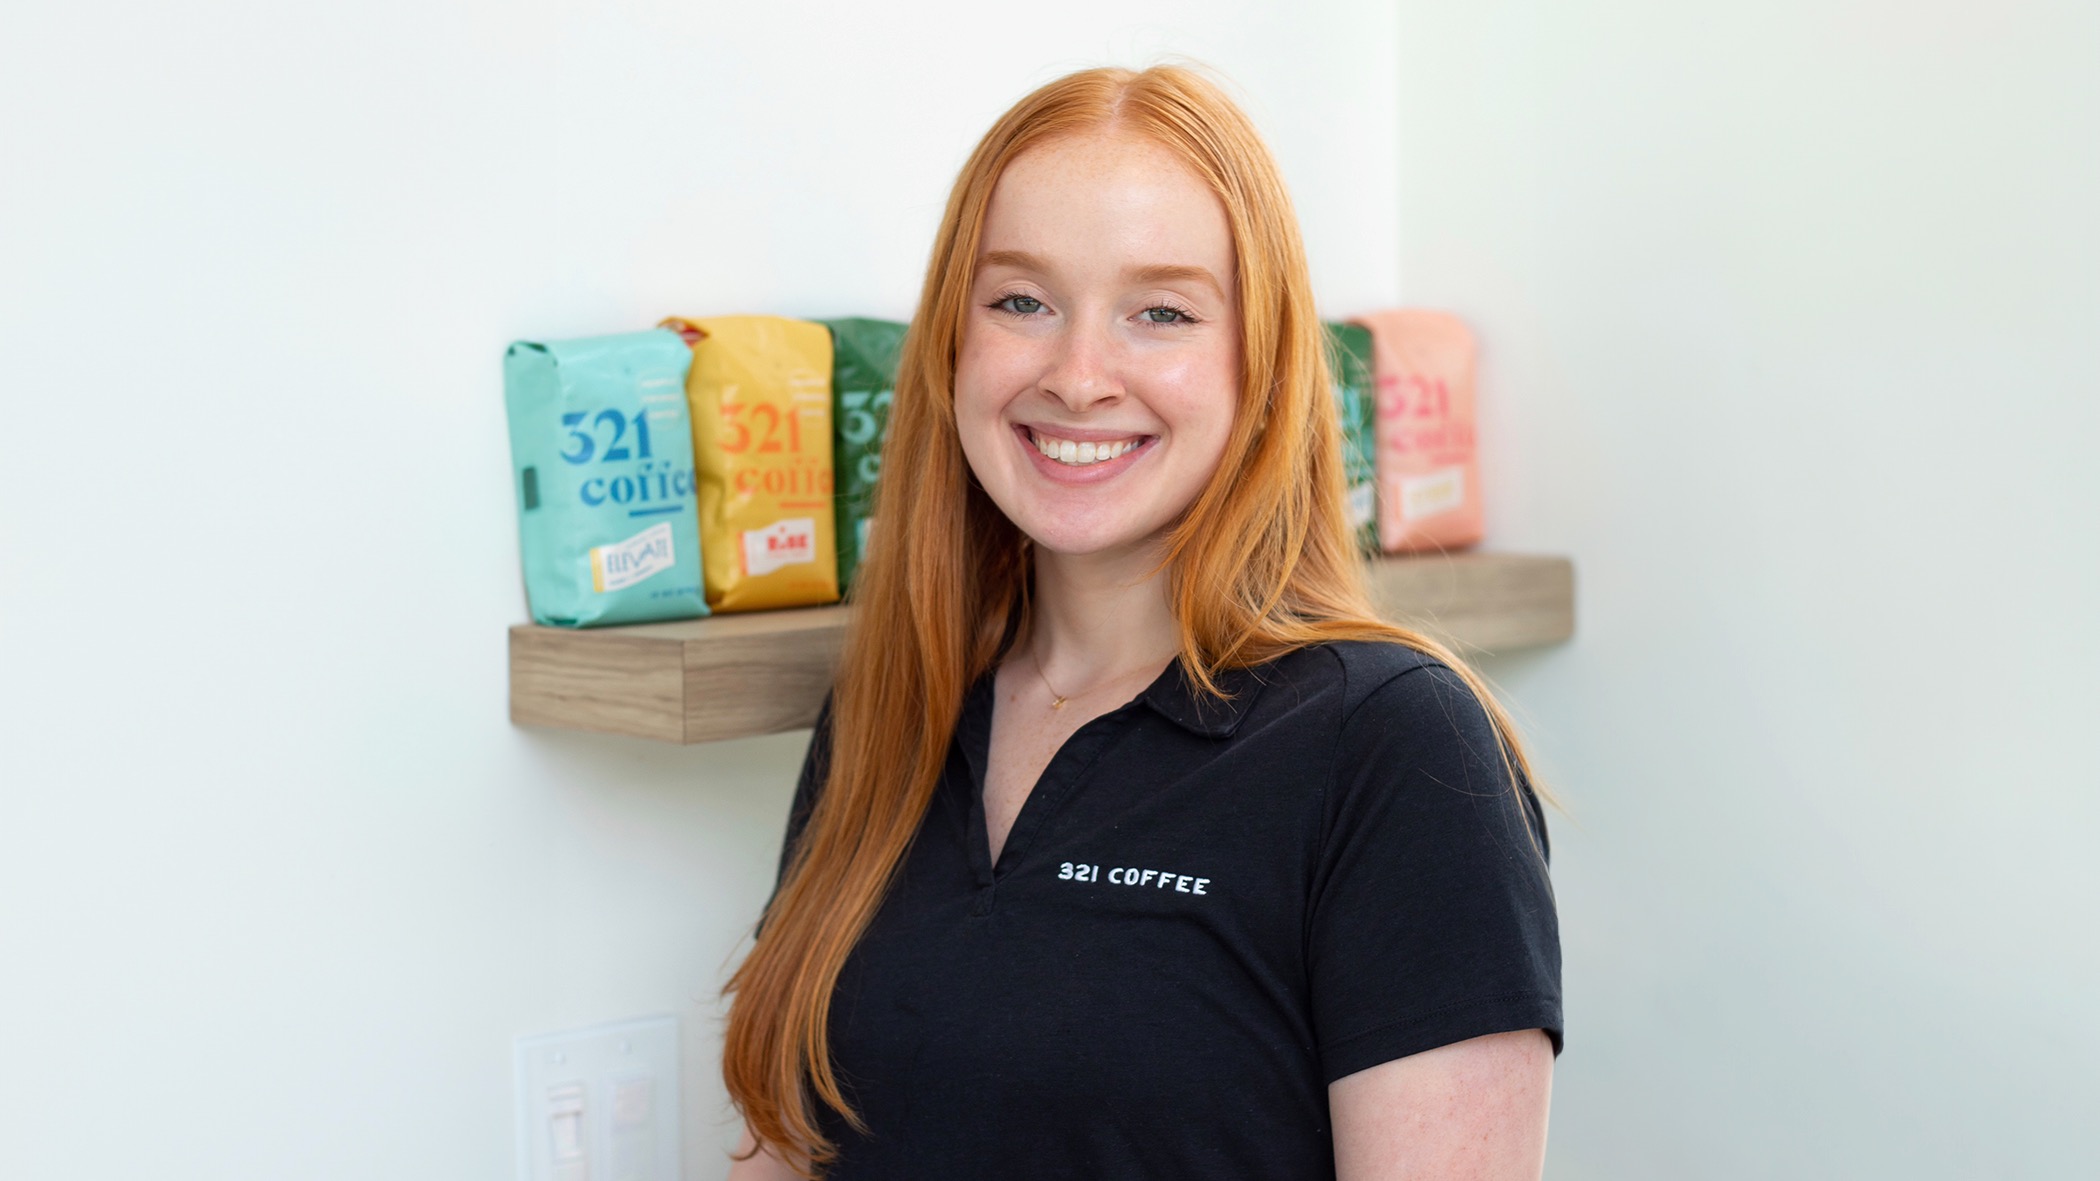 headshot of Audrey Westlund with bags of 321 coffee on a shelf nearby